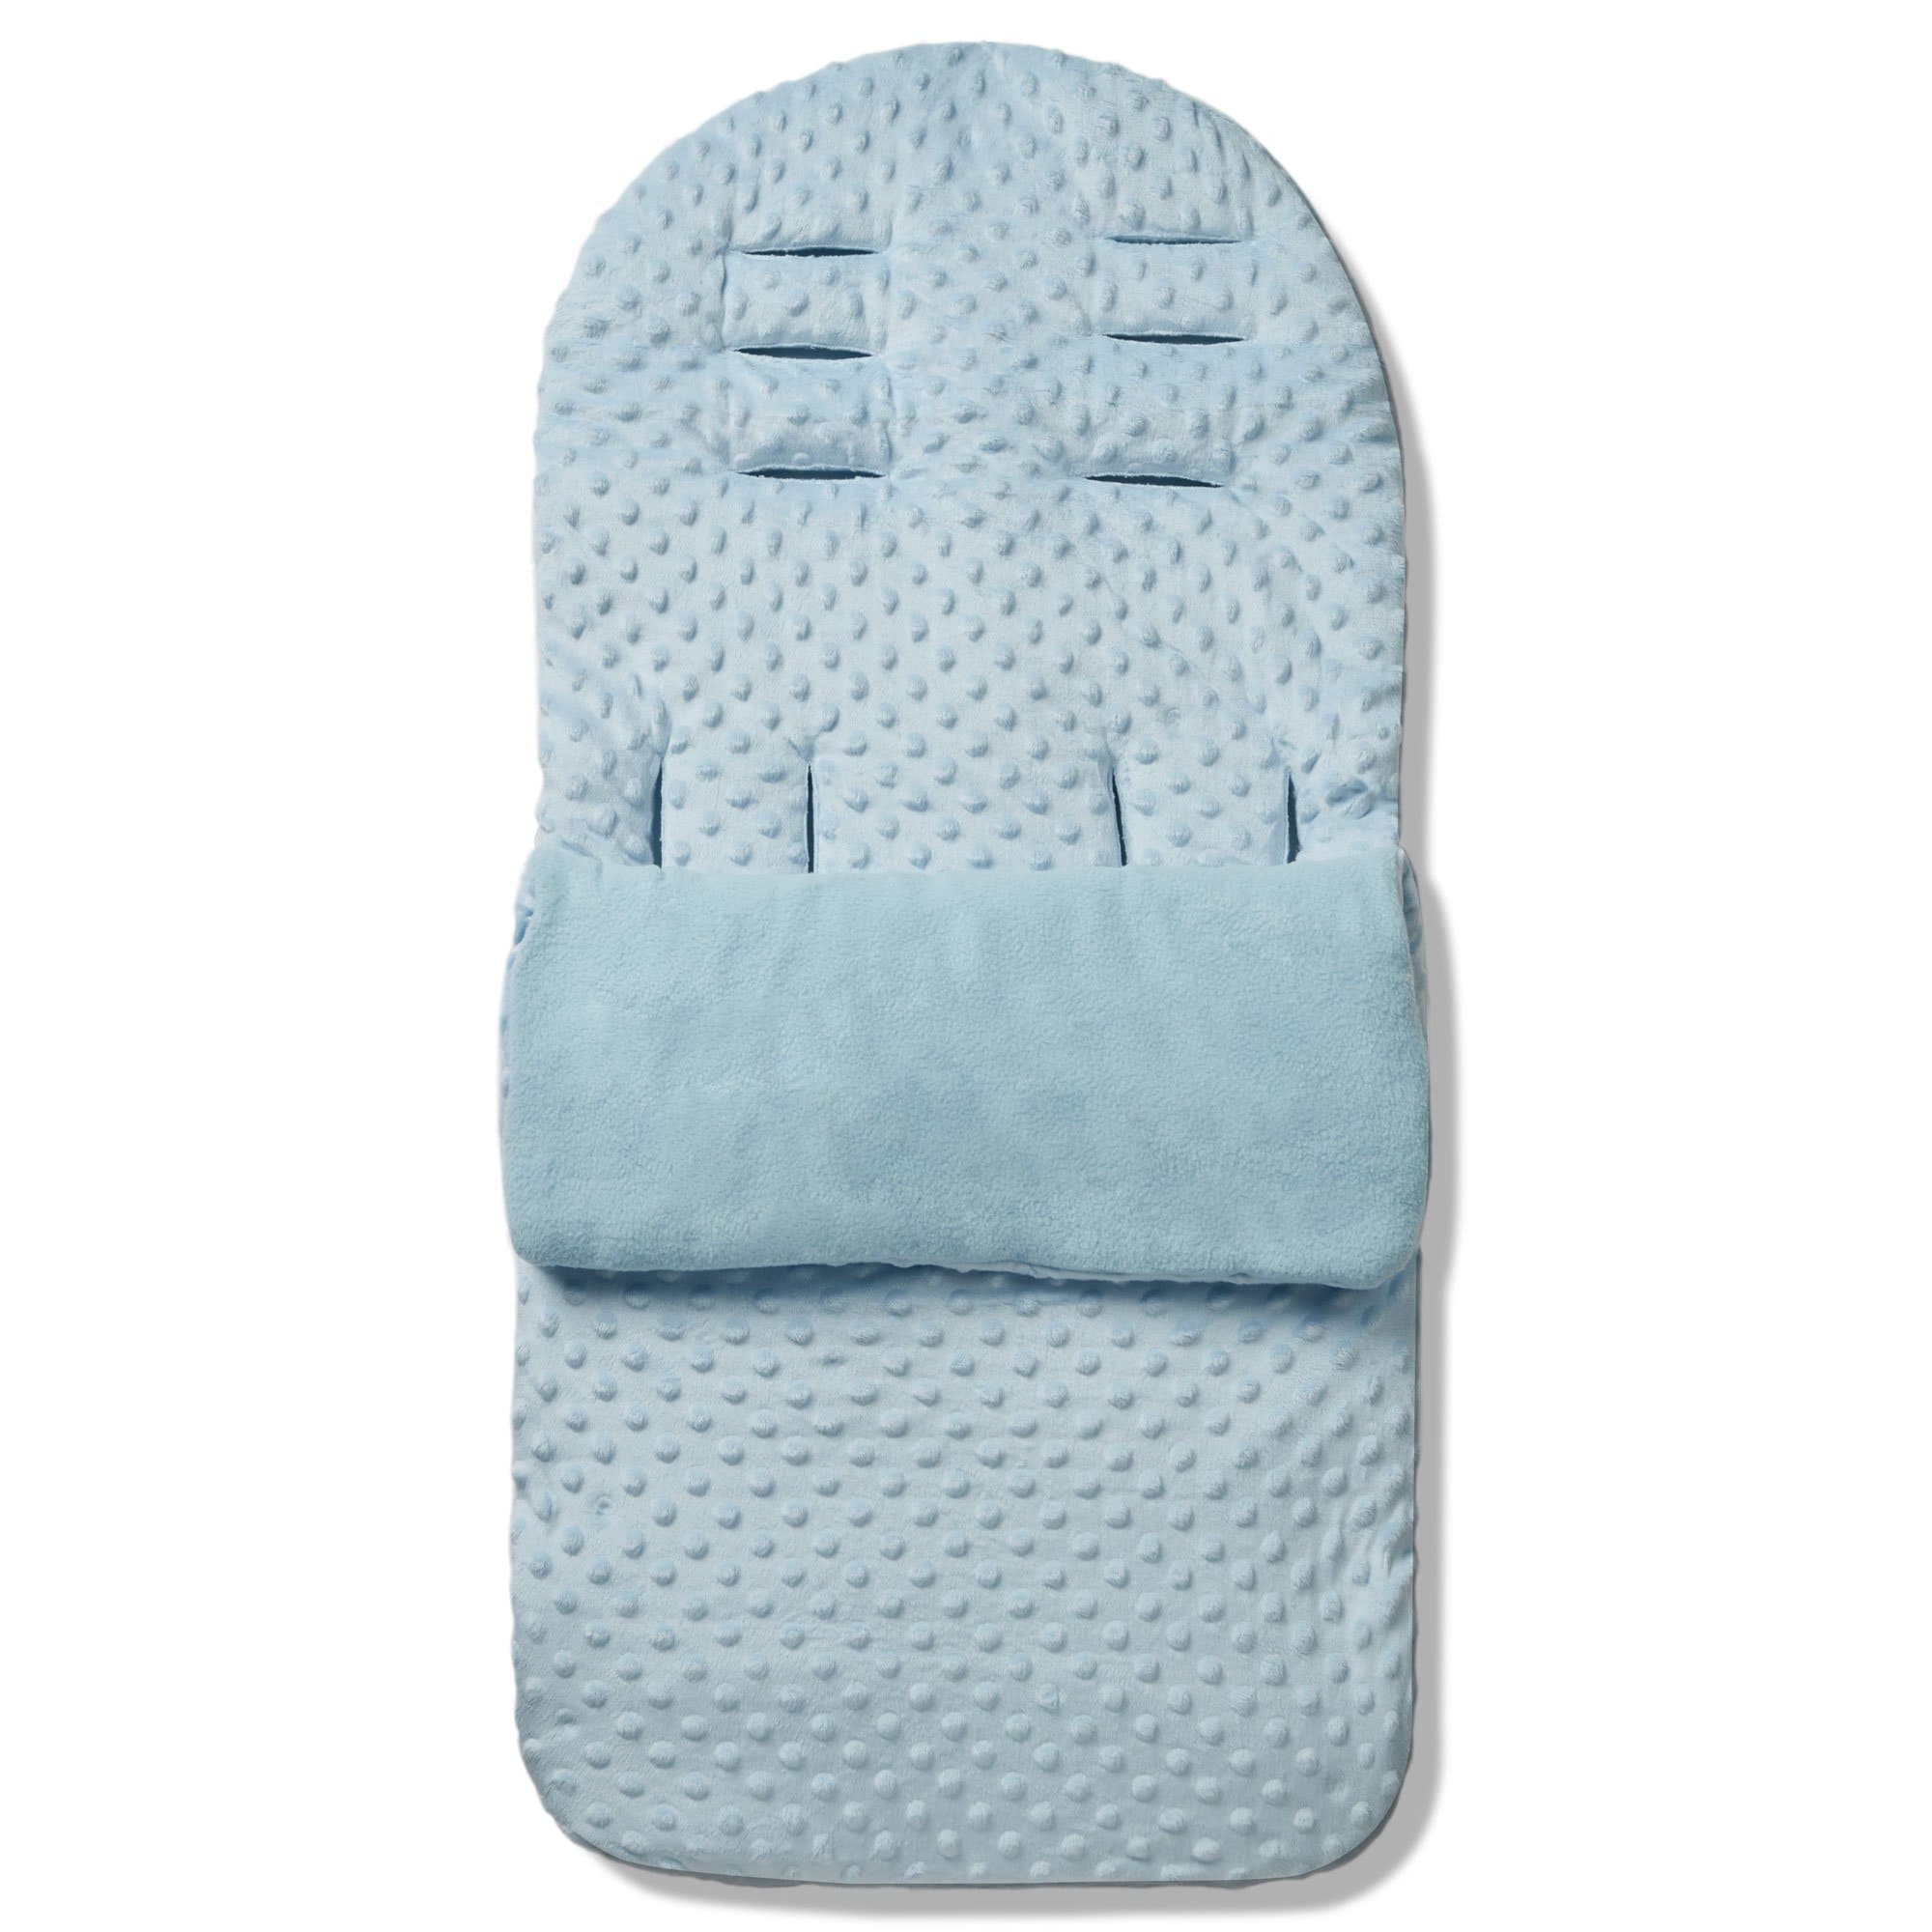 Dimple Footmuff / Cosy Toes Compatible with Zeta - Blue / Fits All Models | For Your Little One